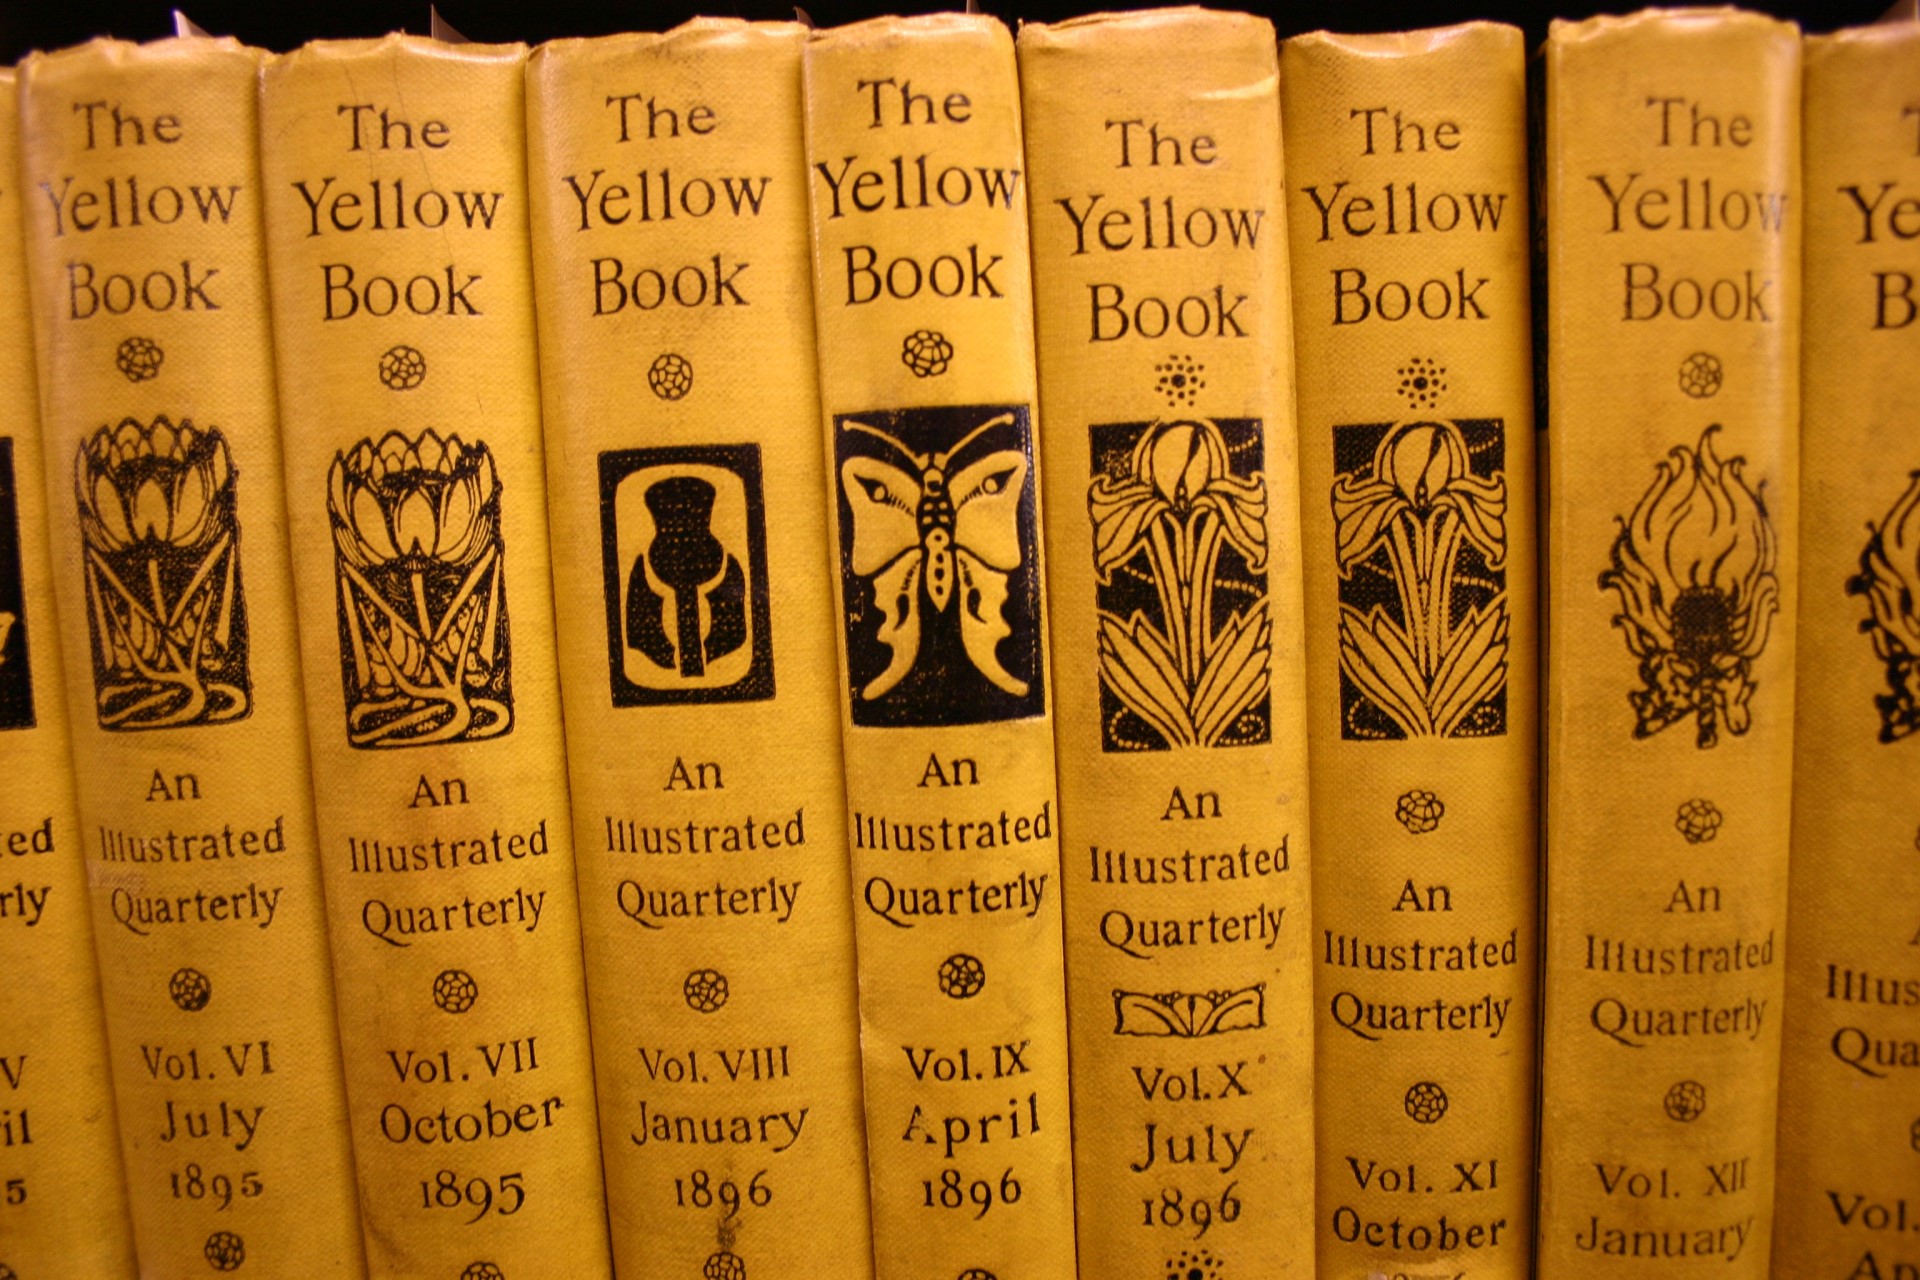 The Yellow Book spines